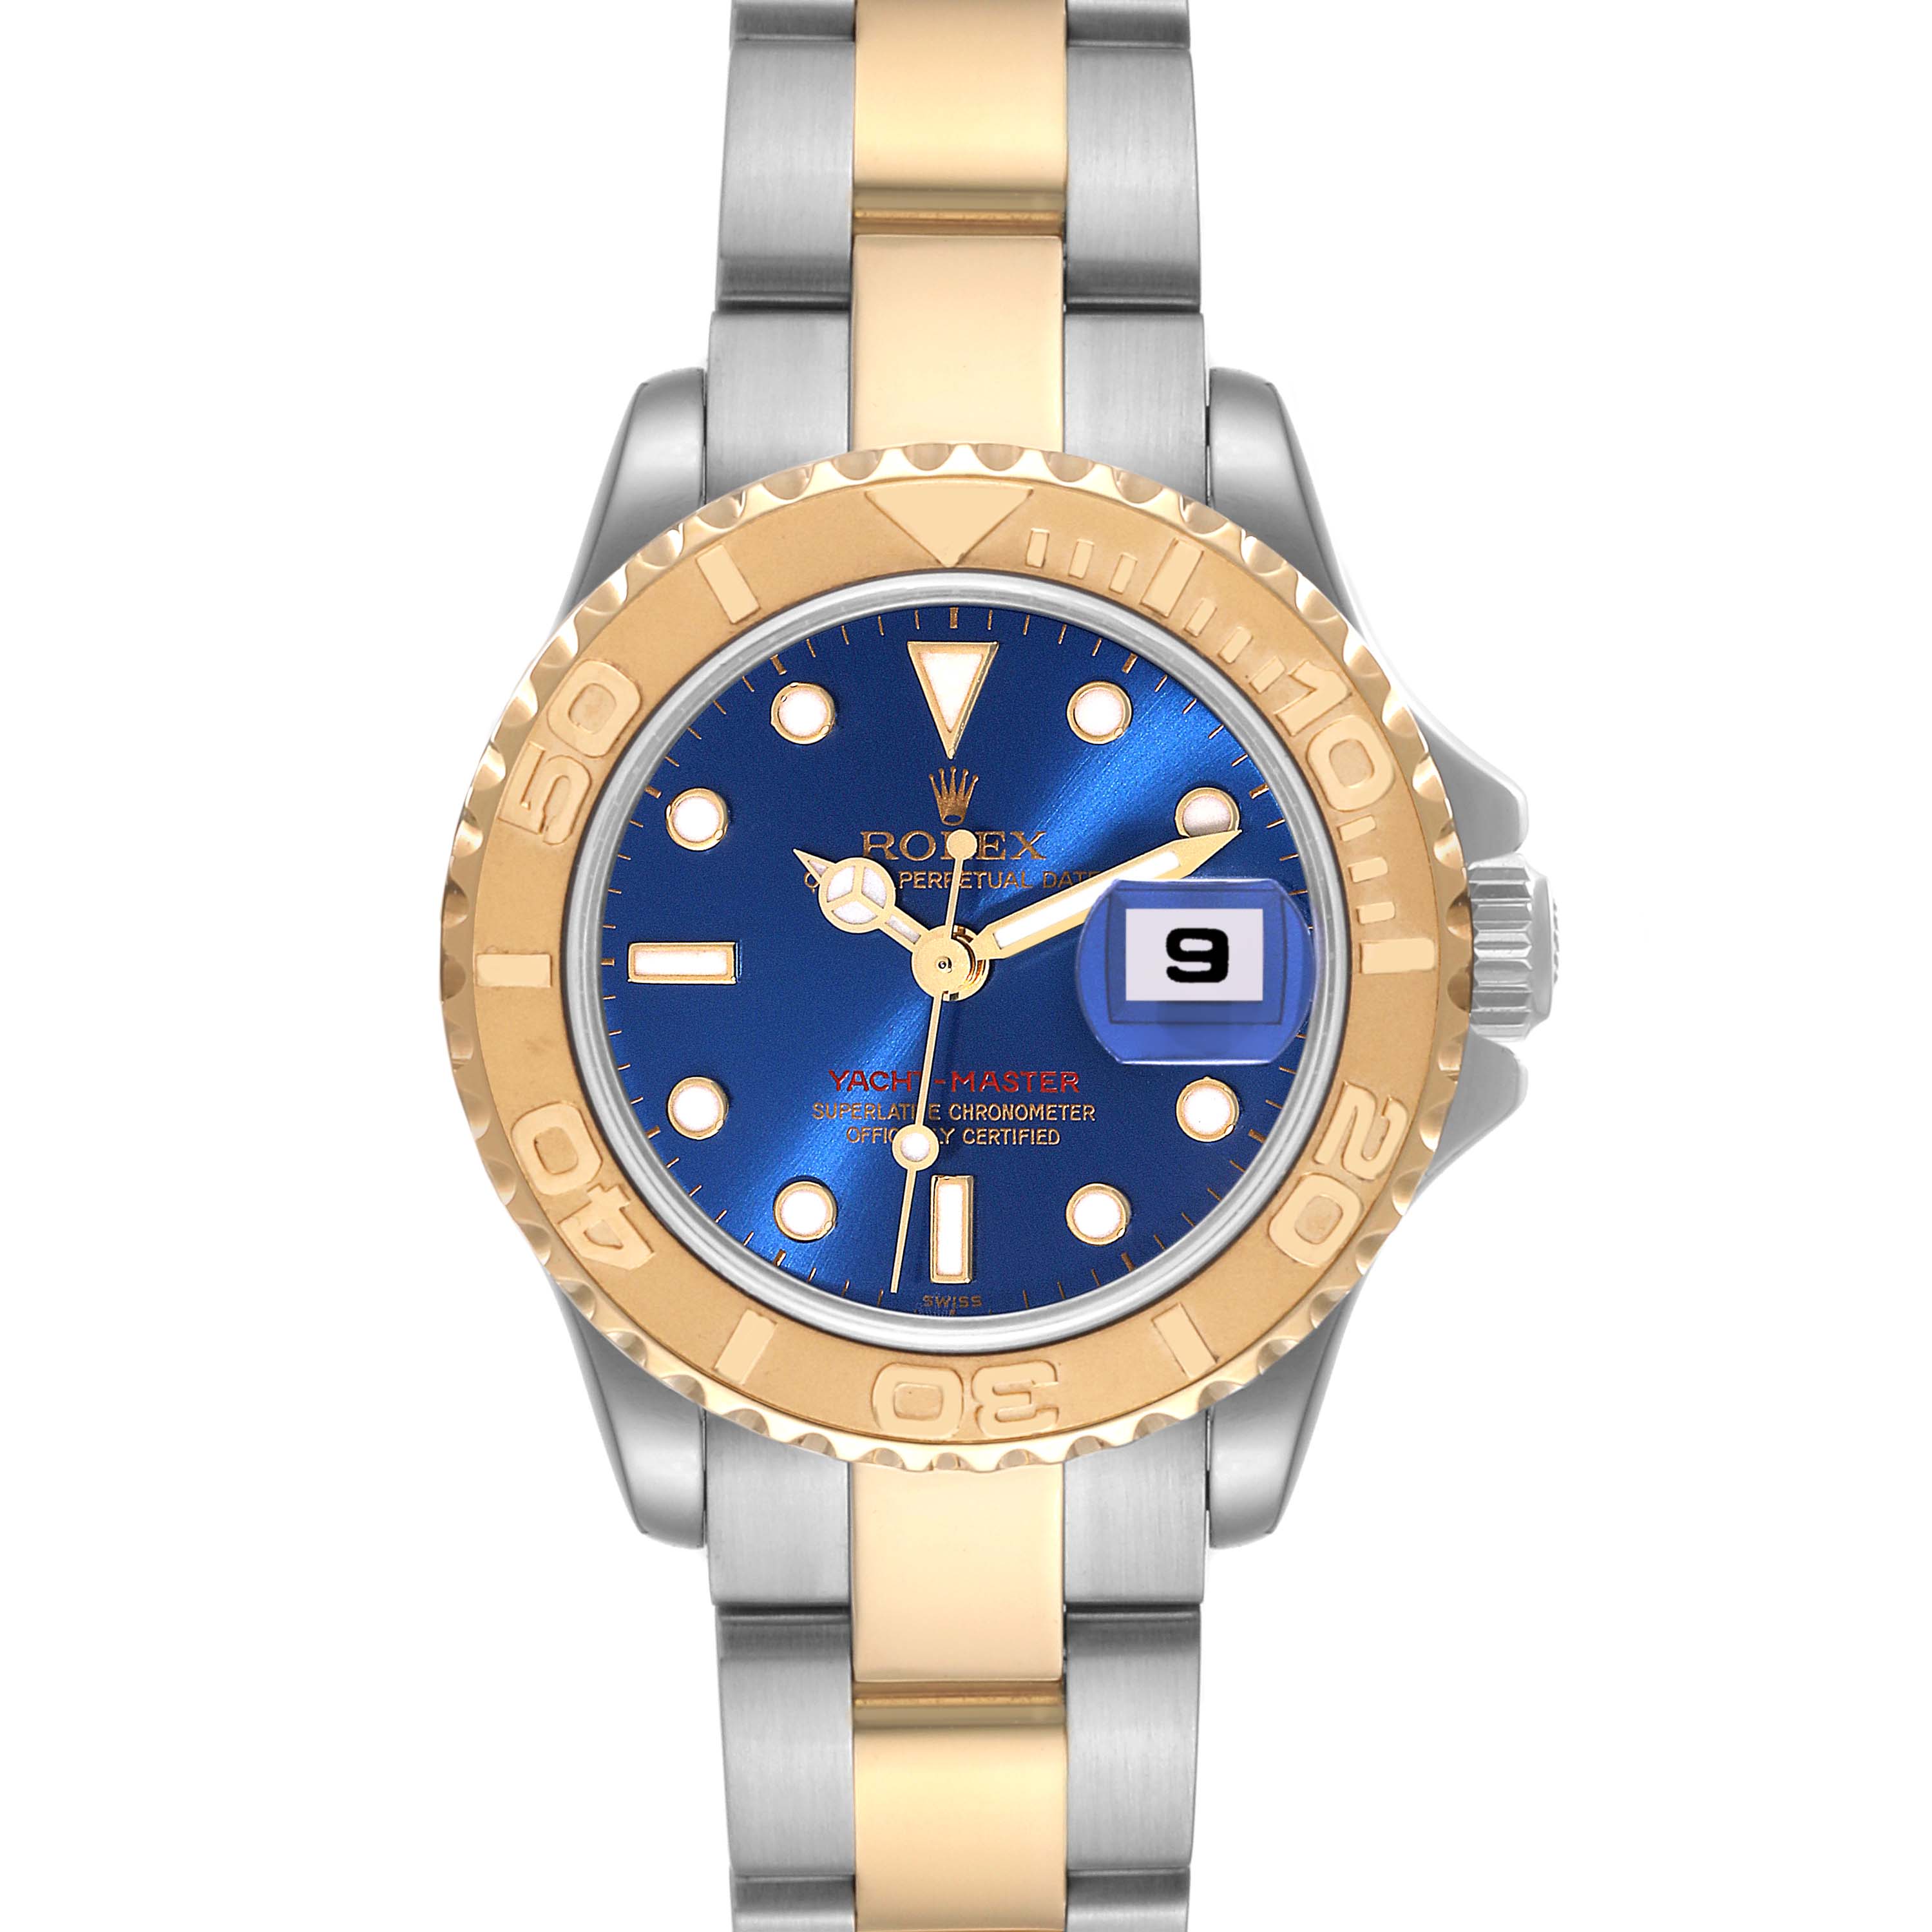 The Yacht-Master in stainless steel with the blue dial